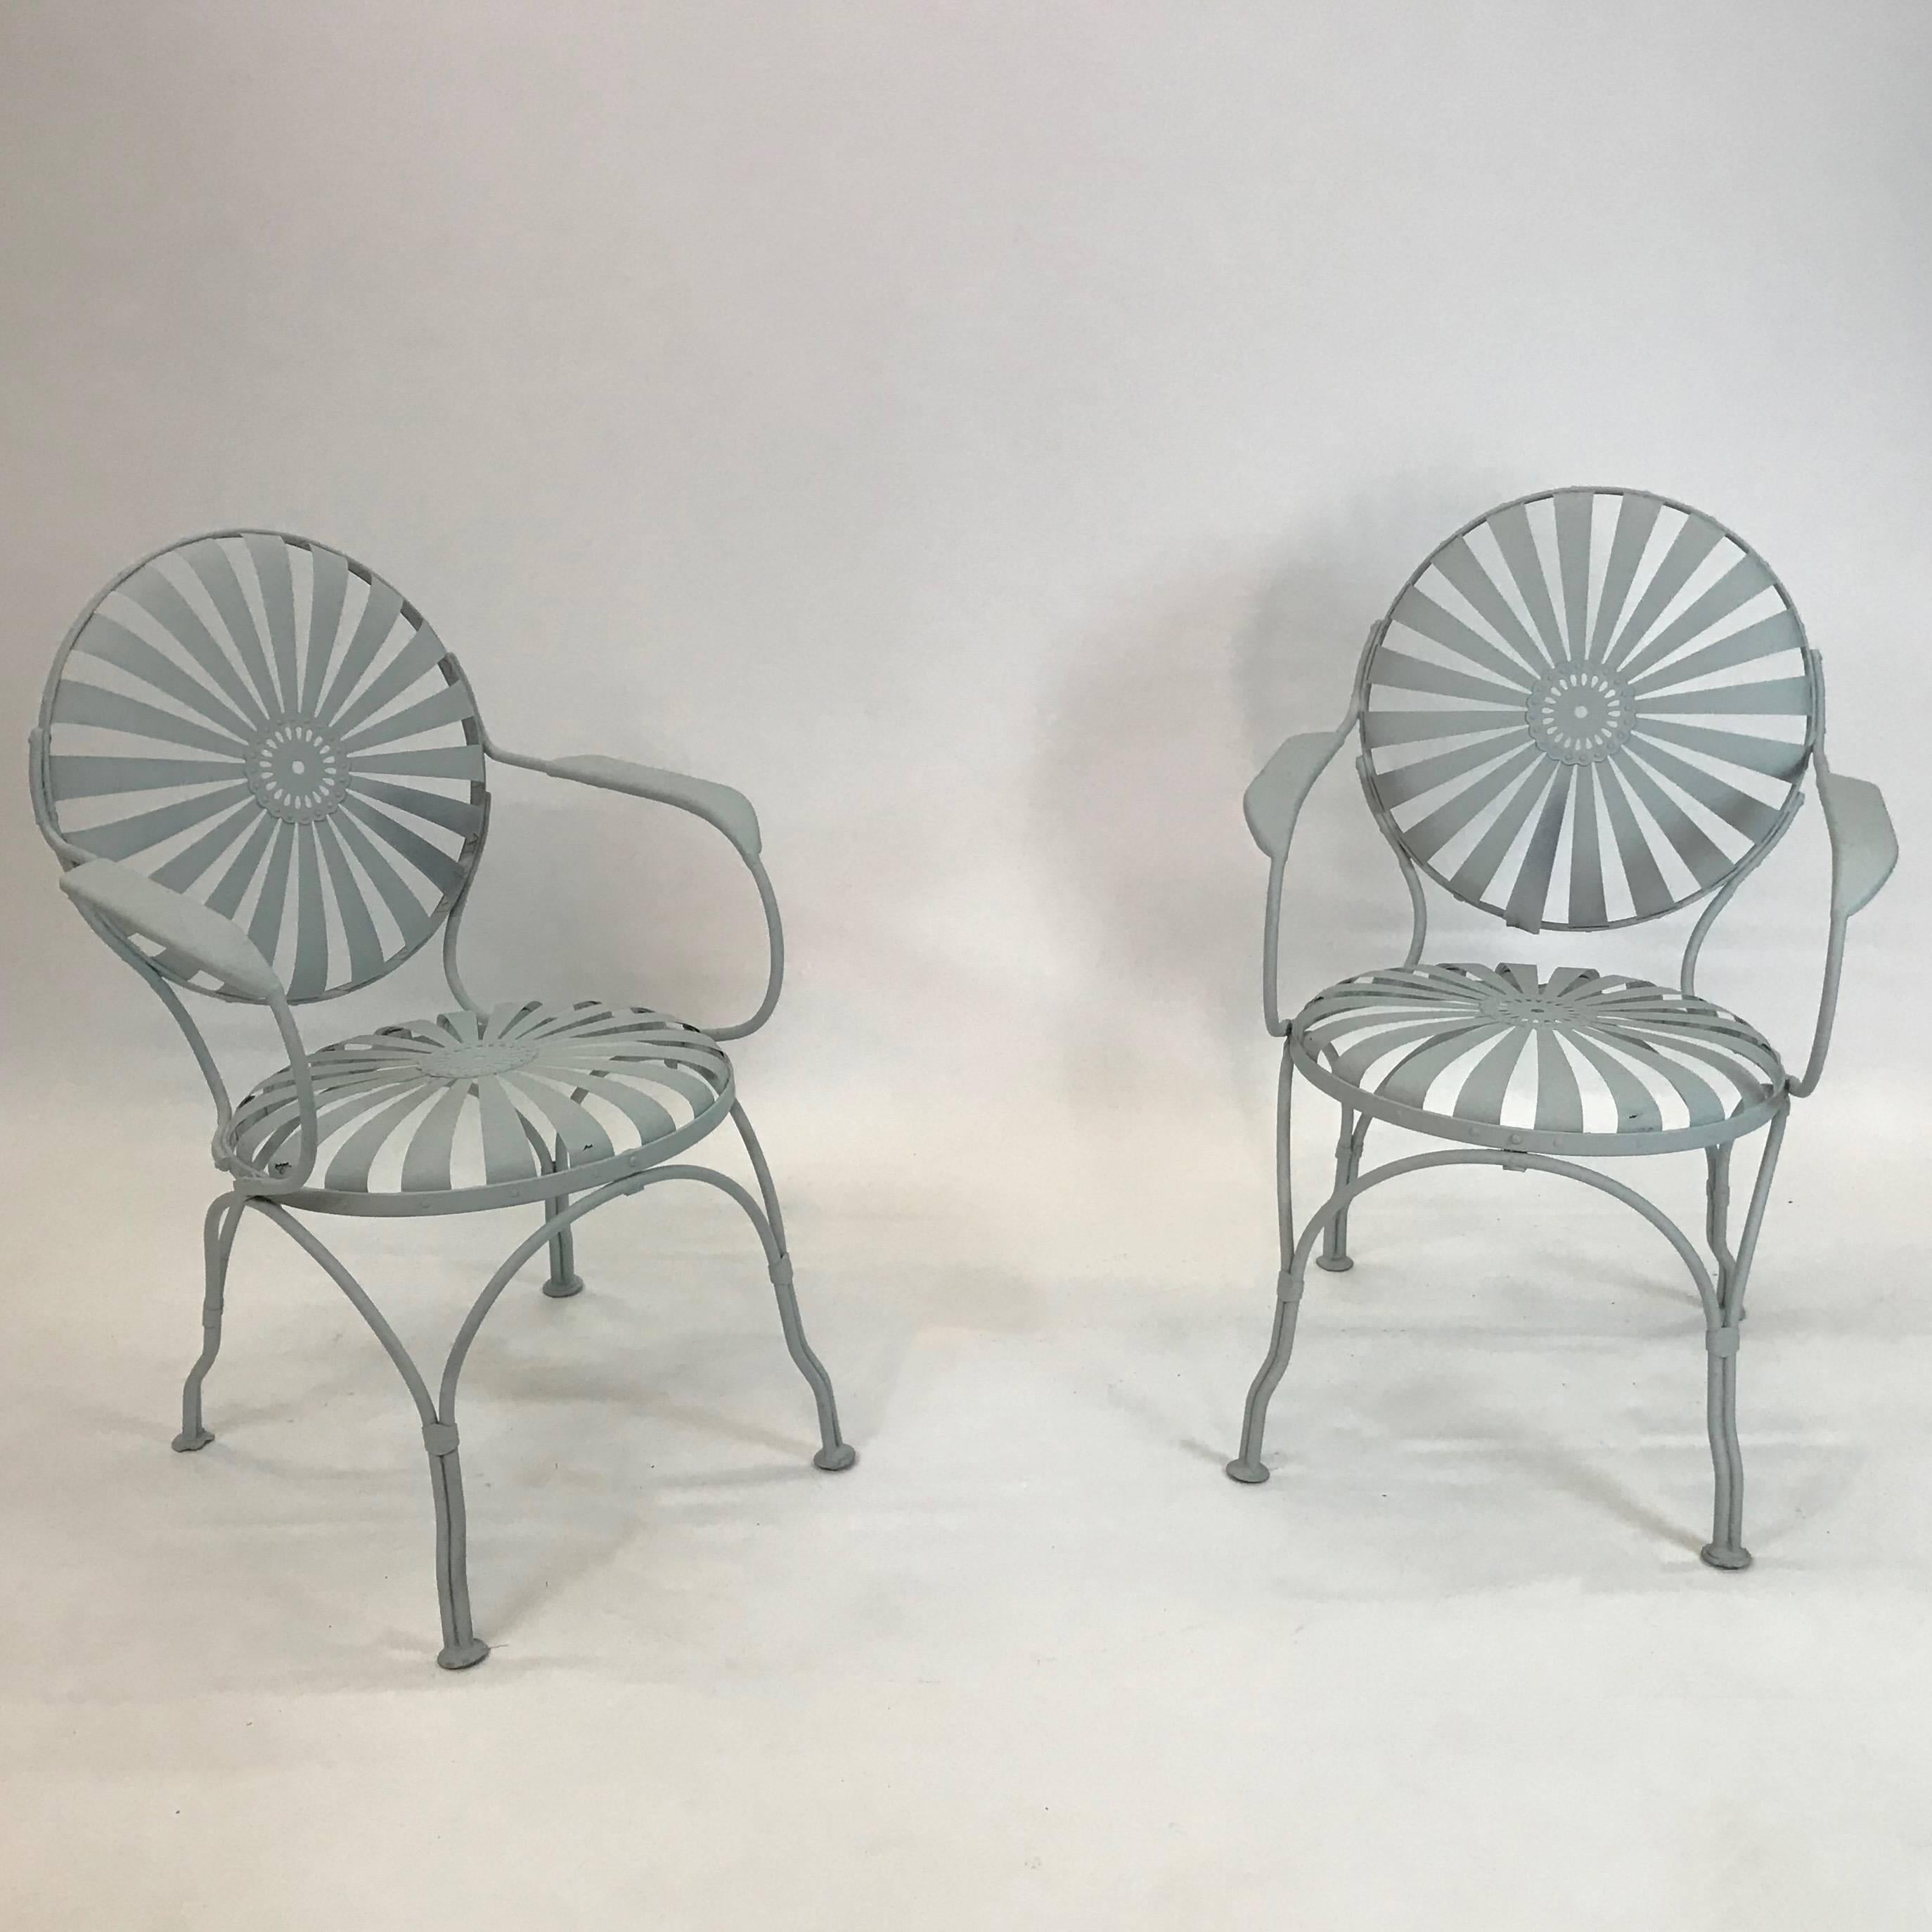 Pair of French Art Deco, painted steel, garden patio armchairs by Francois Carre´, circa 1930s feature slat steel, sunburst motif seats and backs in a matte powder blue.

 